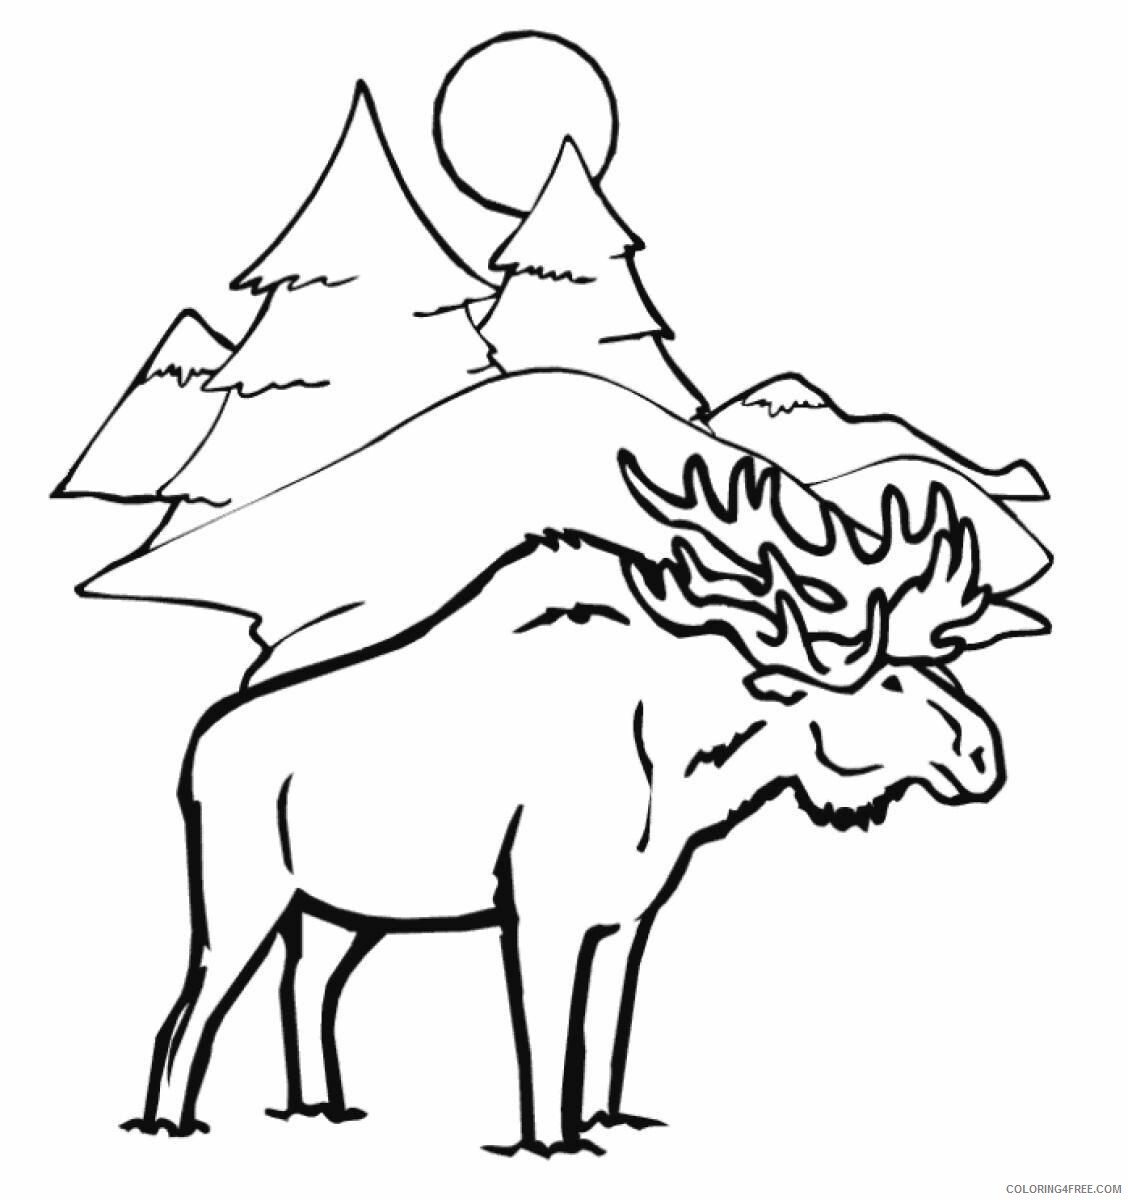 Moose Coloring Sheets Animal Coloring Pages Printable 2021 2902 Coloring4free